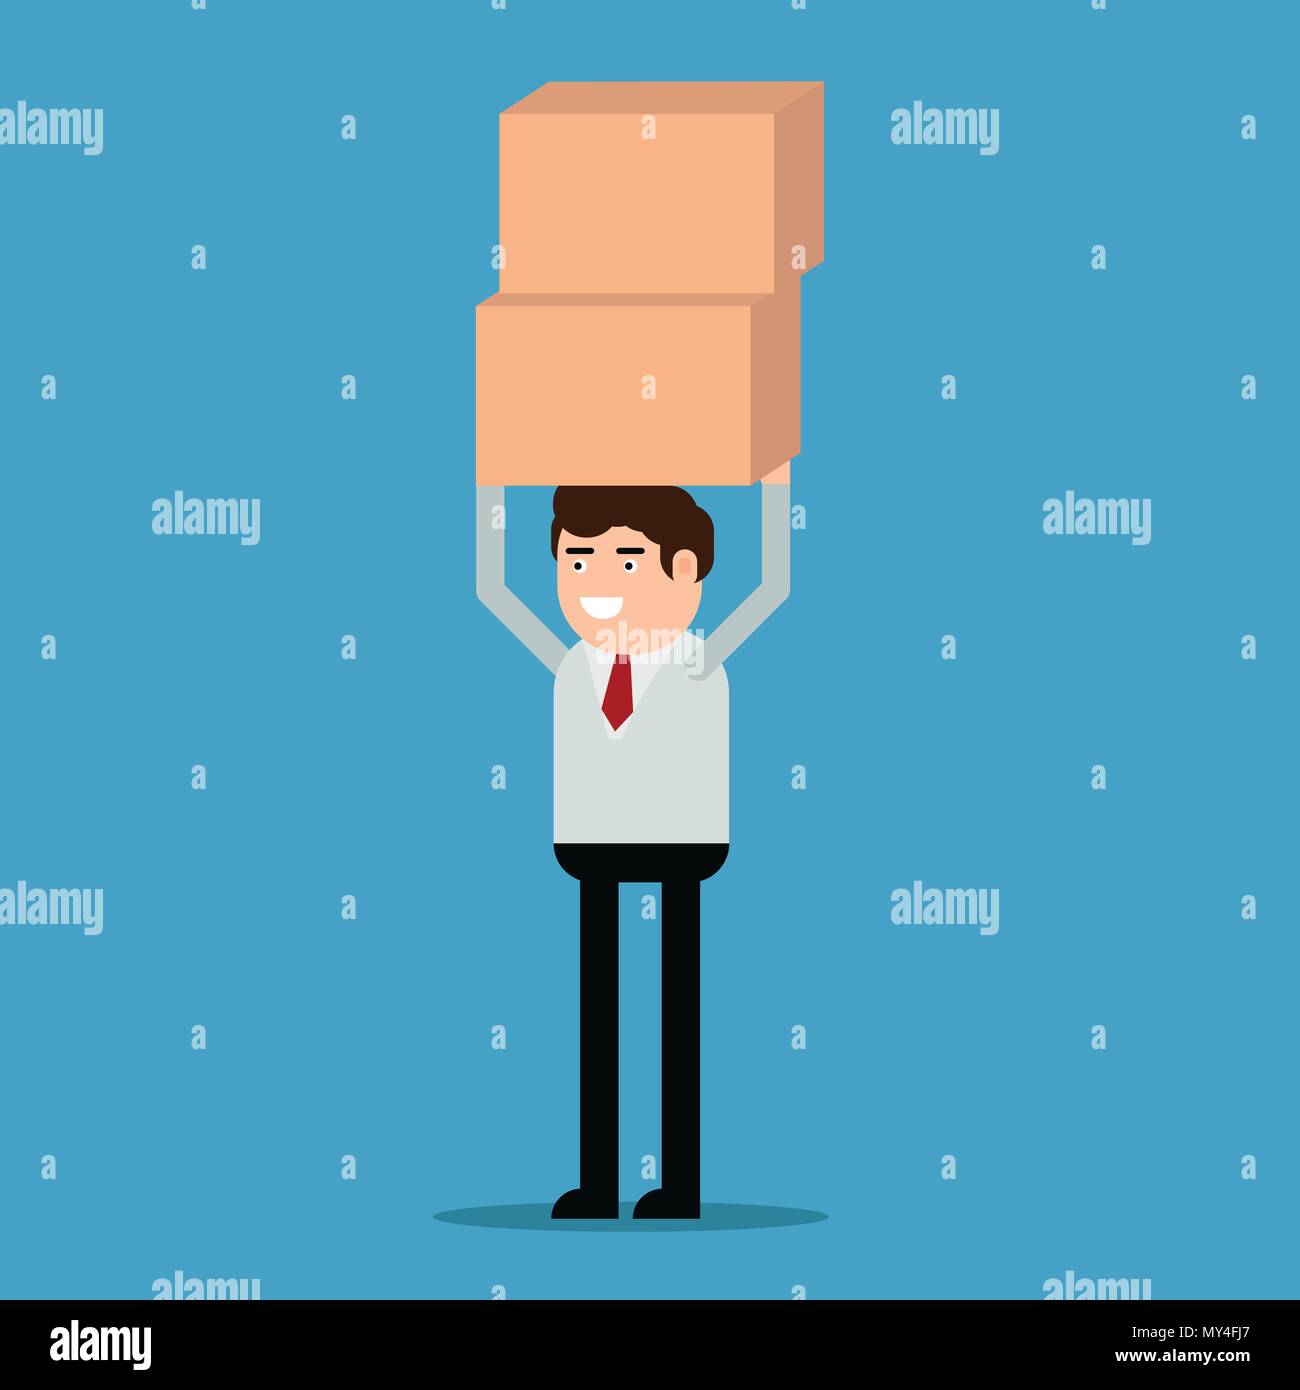 Businessman is carrying a boxes, vector illustration on a blue background Stock Vector